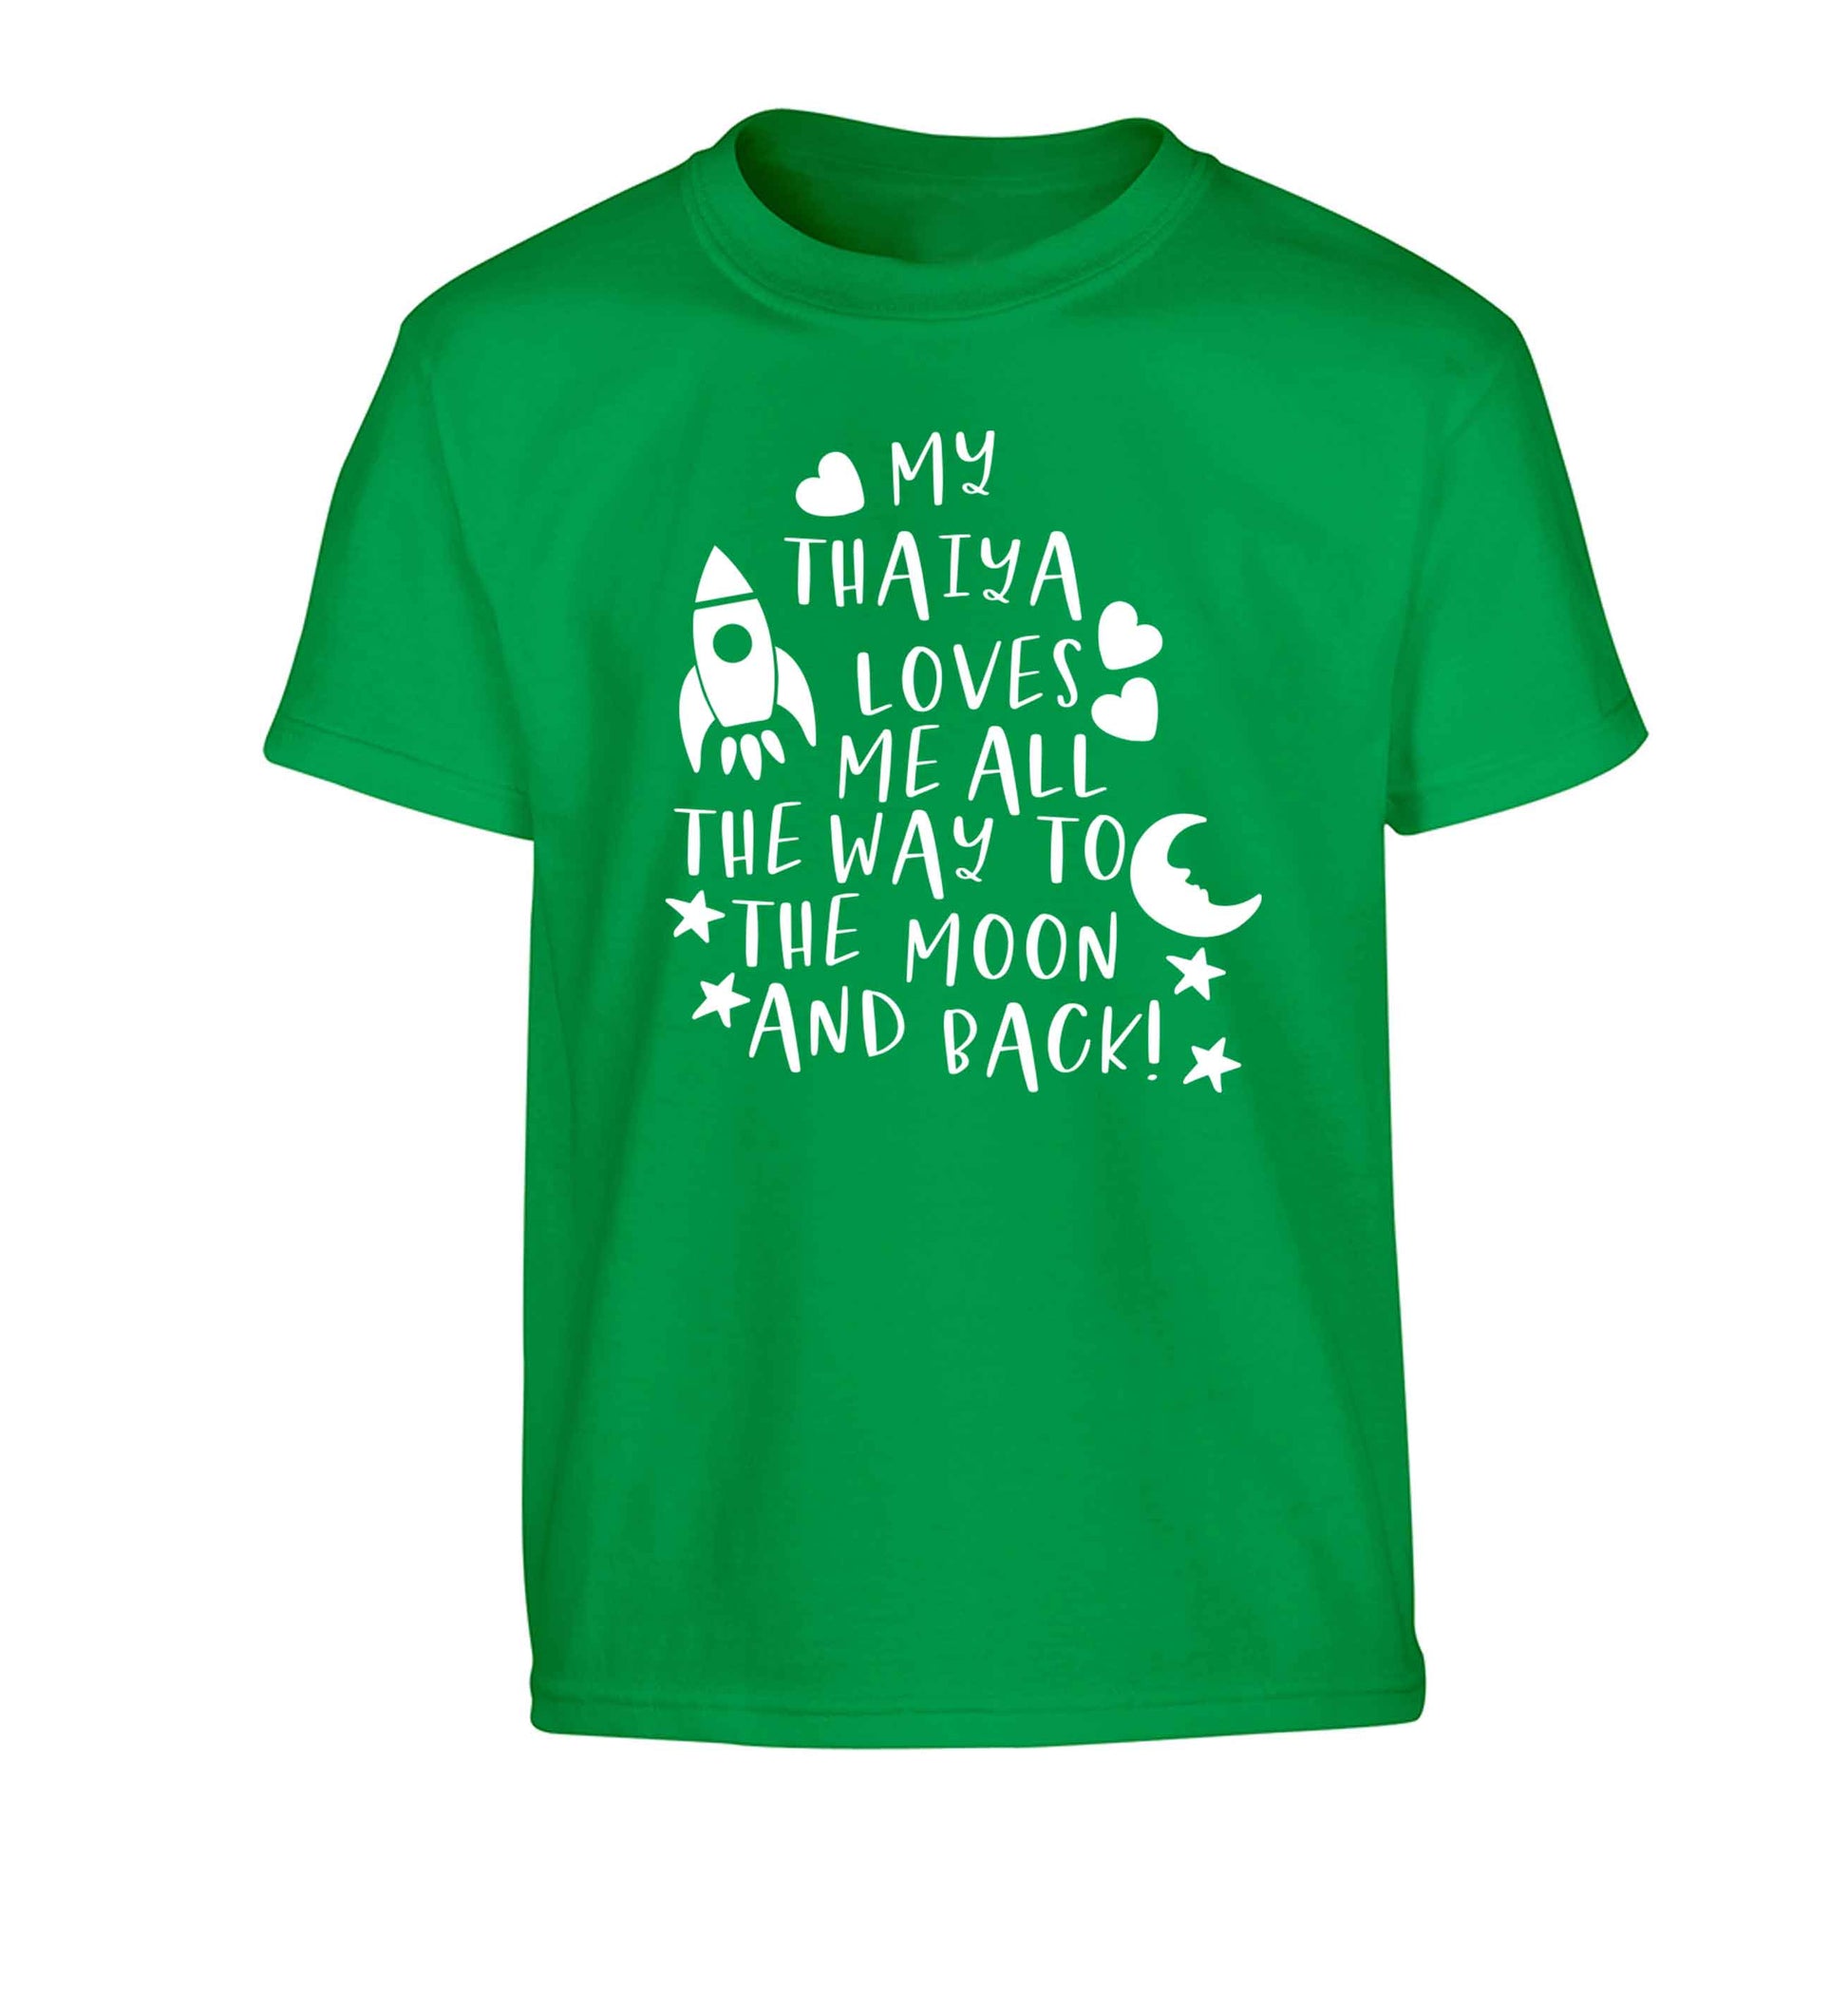 My thaiya loves me all the way to the moon and back Children's green Tshirt 12-13 Years